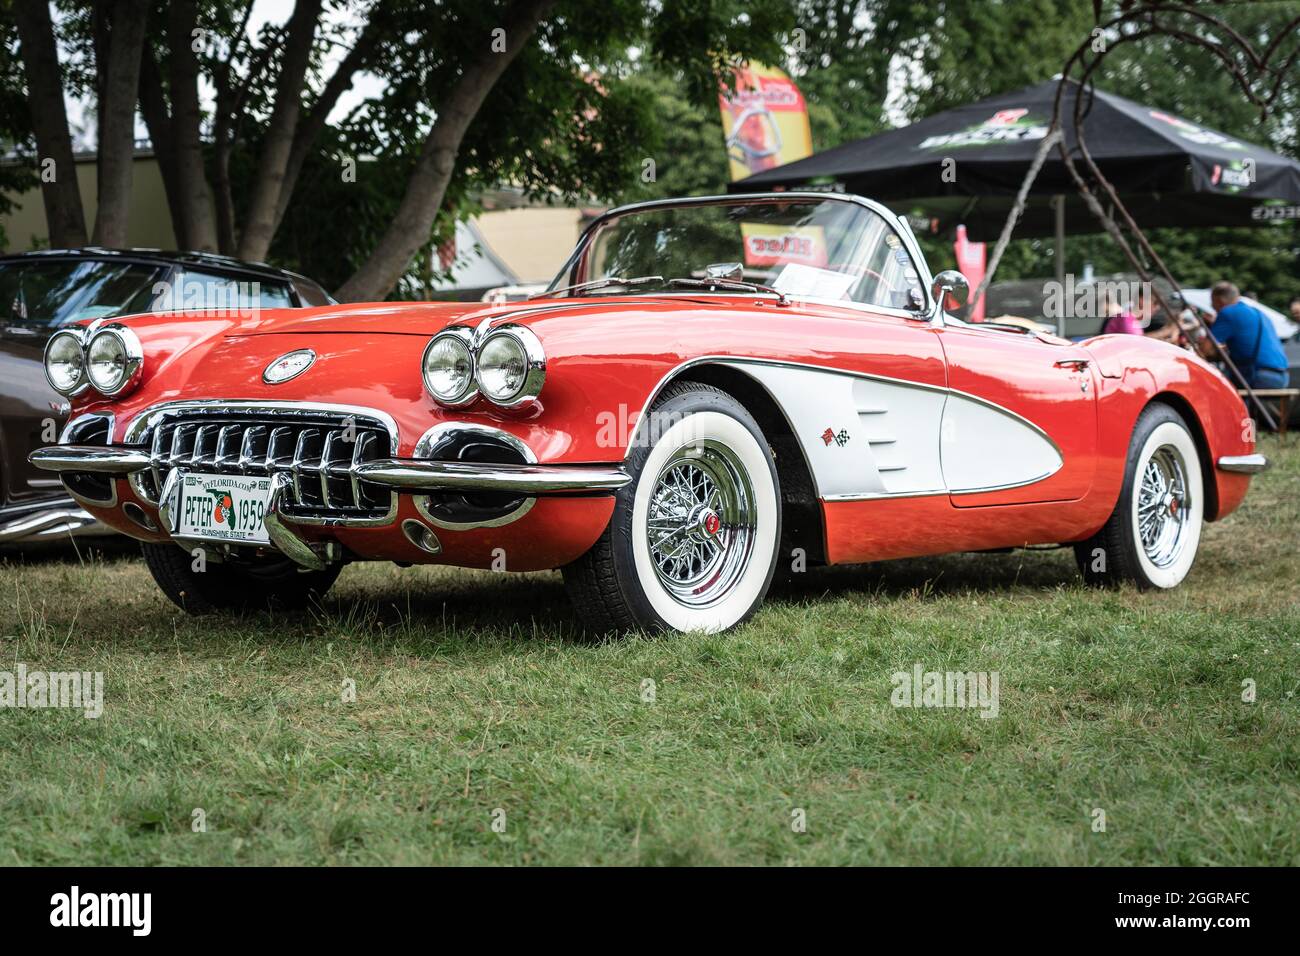 DIEDERSDORF, GERMANY - AUGUST 21, 2021: The sports car Chevrolet Corvette (C1), 1960. The exhibition of 'US Car Classics'. Stock Photo